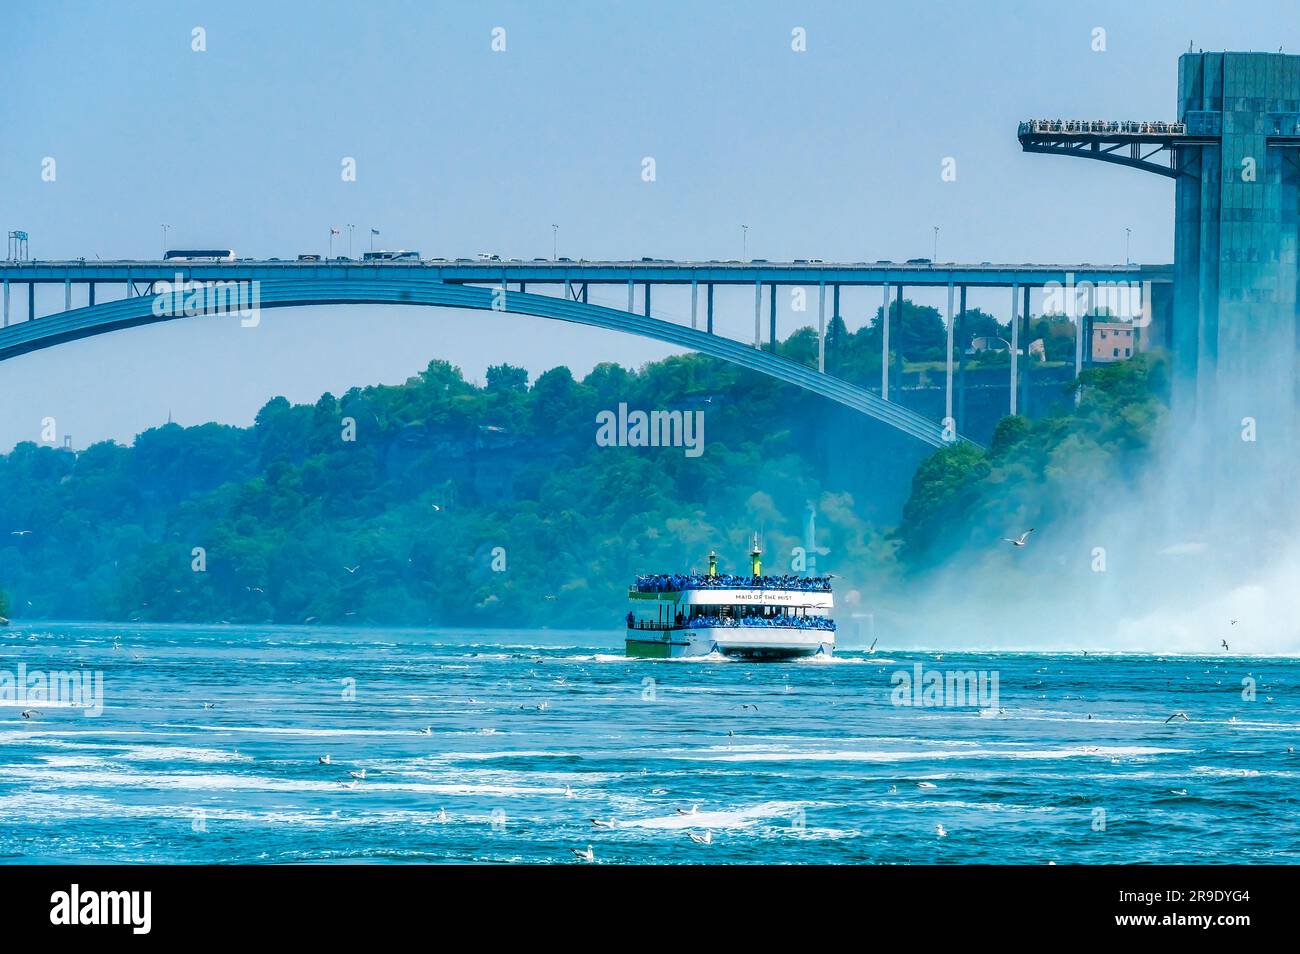 Niagara Falls, Ontario, Canada - June 17, 2023: Tour boat or small boats carrying passengers in the Niagara River. The ride is a tourist attraction Stock Photo